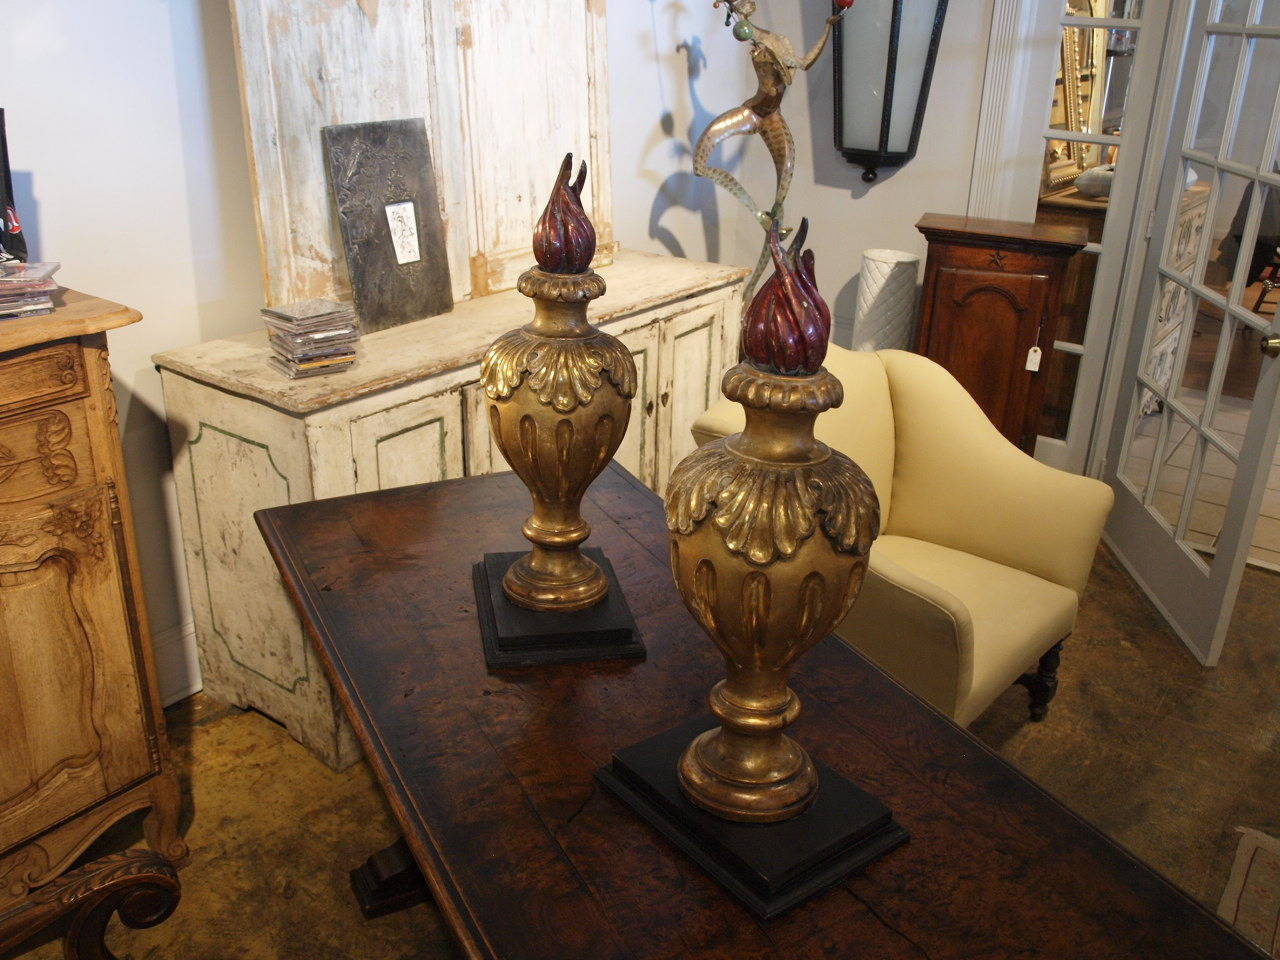 A stunning pair of 19th century Italian flame finials in giltwood. The finials rest upon their removable - added bases. Exquisite decorative objects as they are, or converted into lamps. The overall dimension with the finial standing in its base is